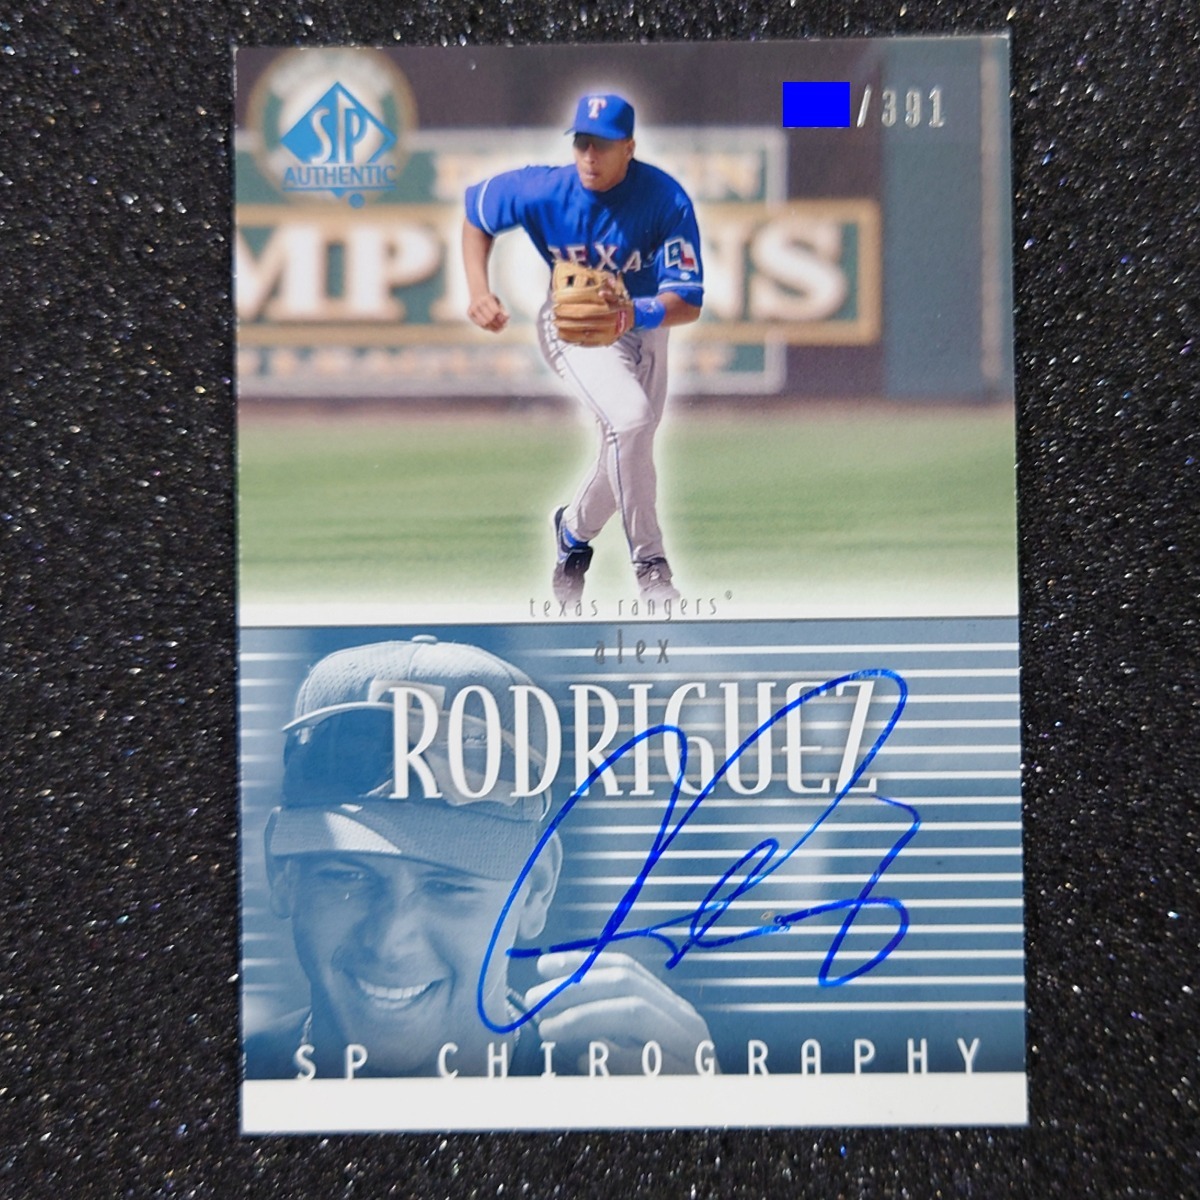 ◆【Auto Card #'d 391】Alex Rodriguez MLB 2001 UD Sp Authentic Sp Chirography ◇検索：アレックス・ロドリゲス 直筆サイン Autograph